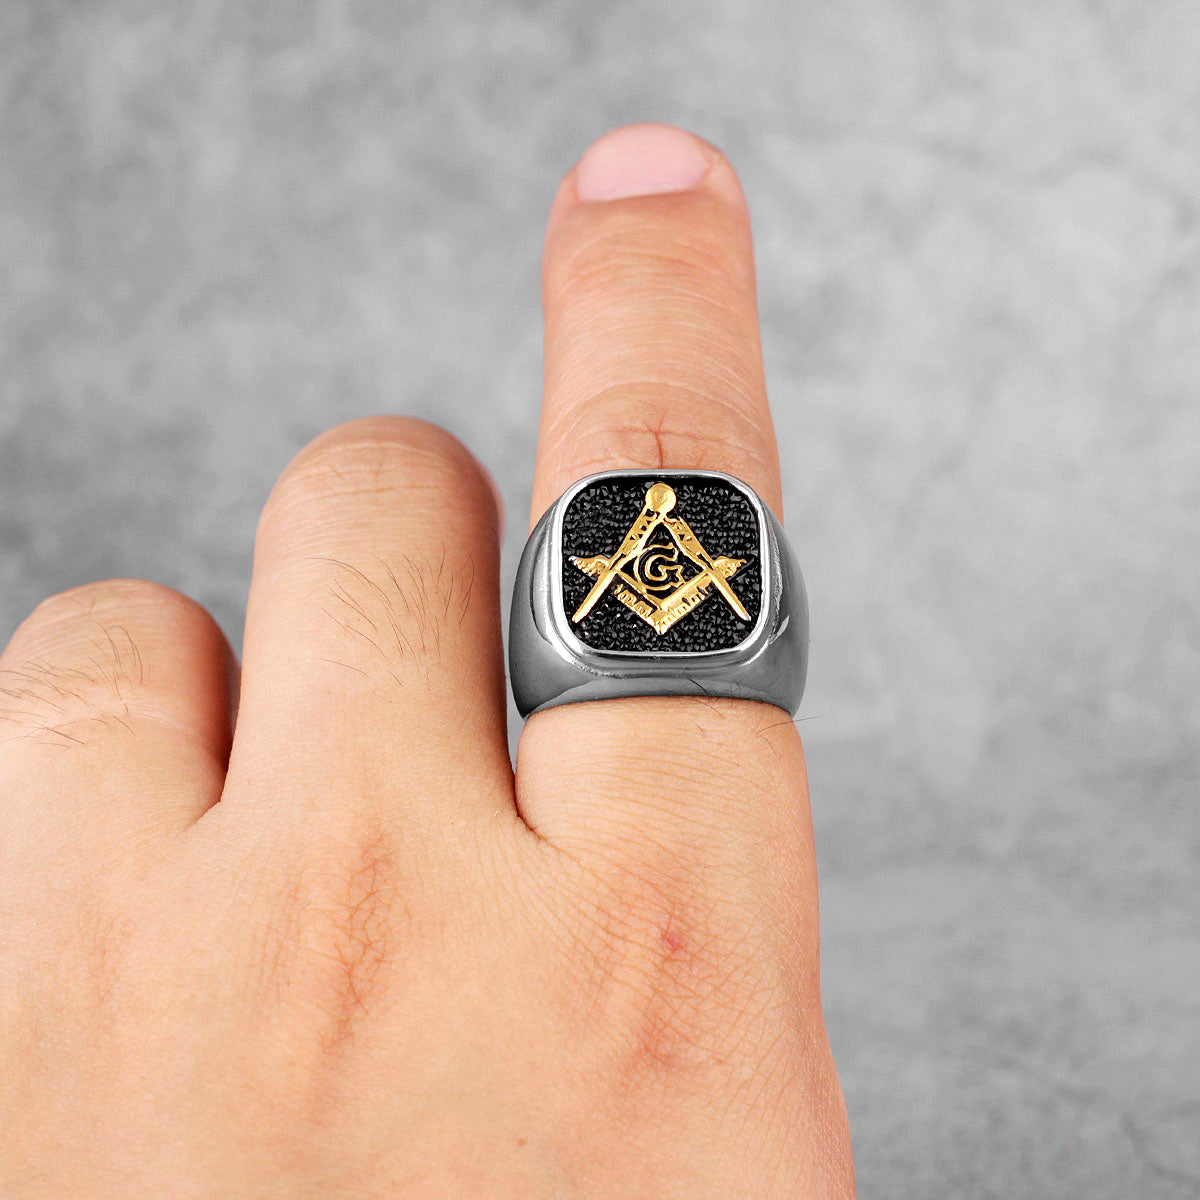 Black and Gold Square and Compasses Ring